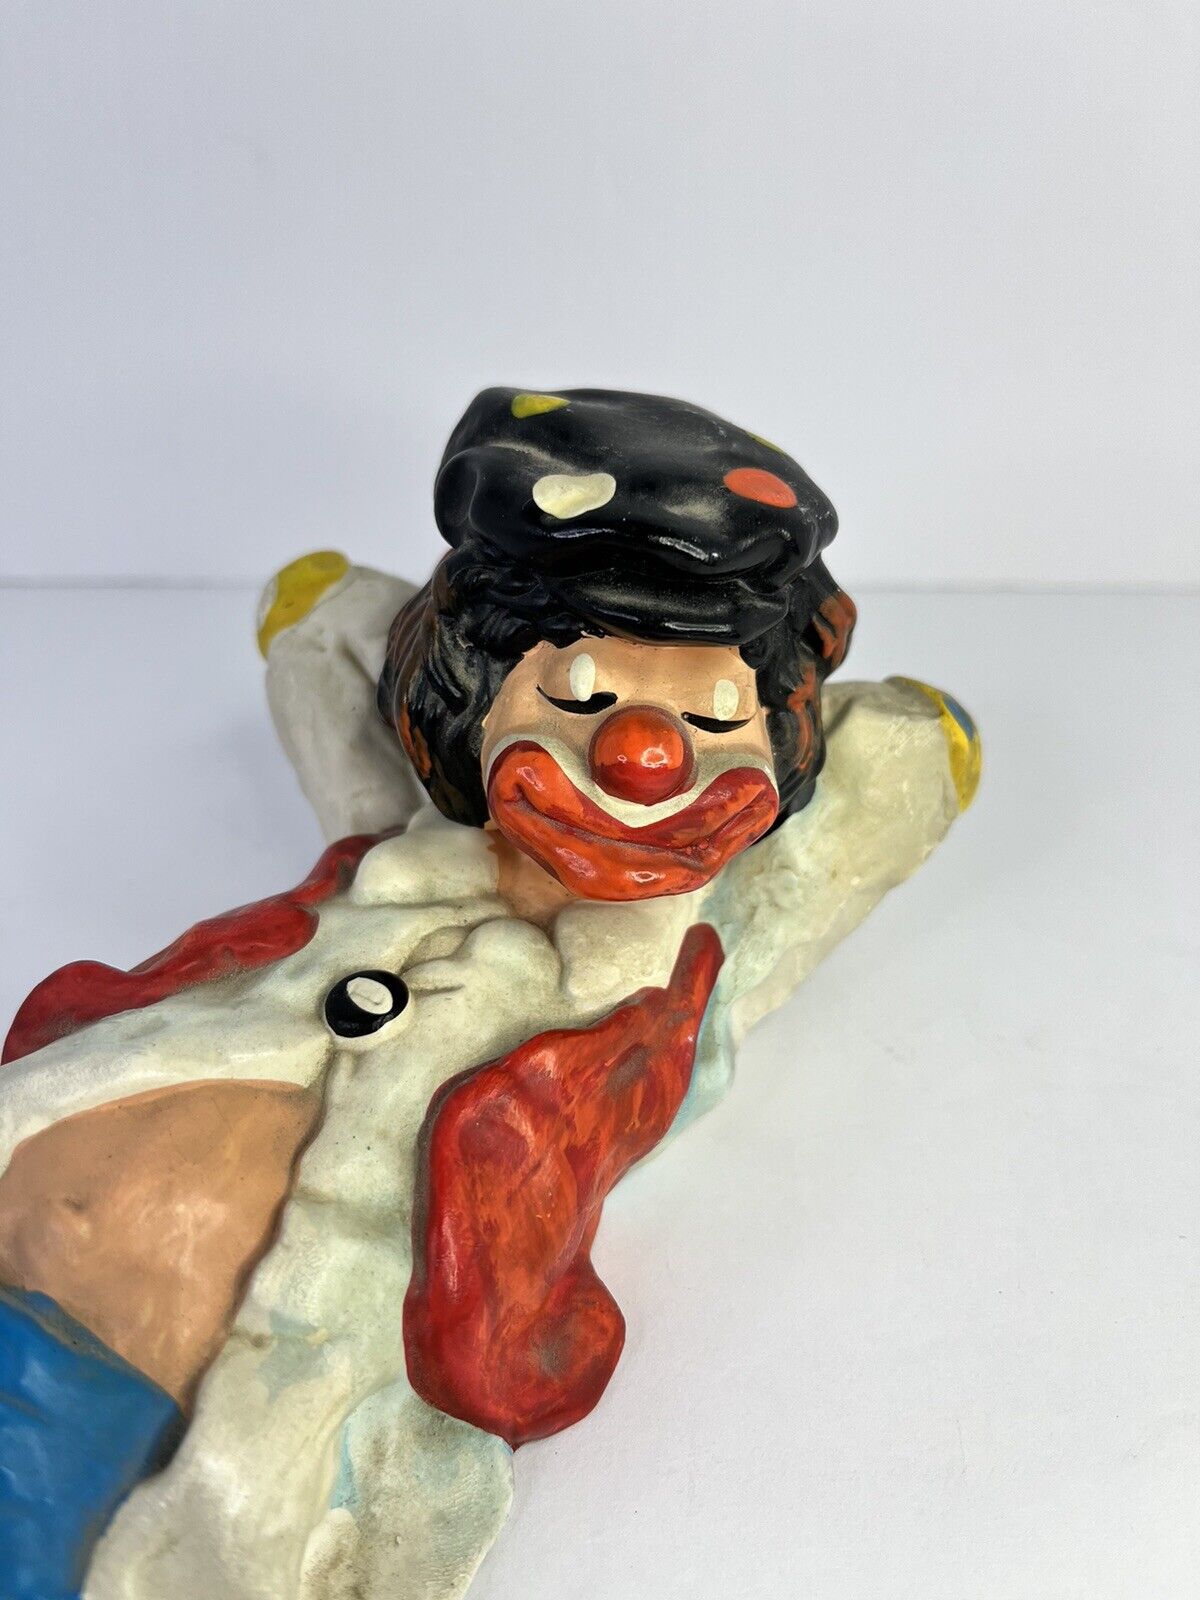 Vintage 1977 Annette Little “The Hobo” Circus Clown Handpainted Figurine 10.5”